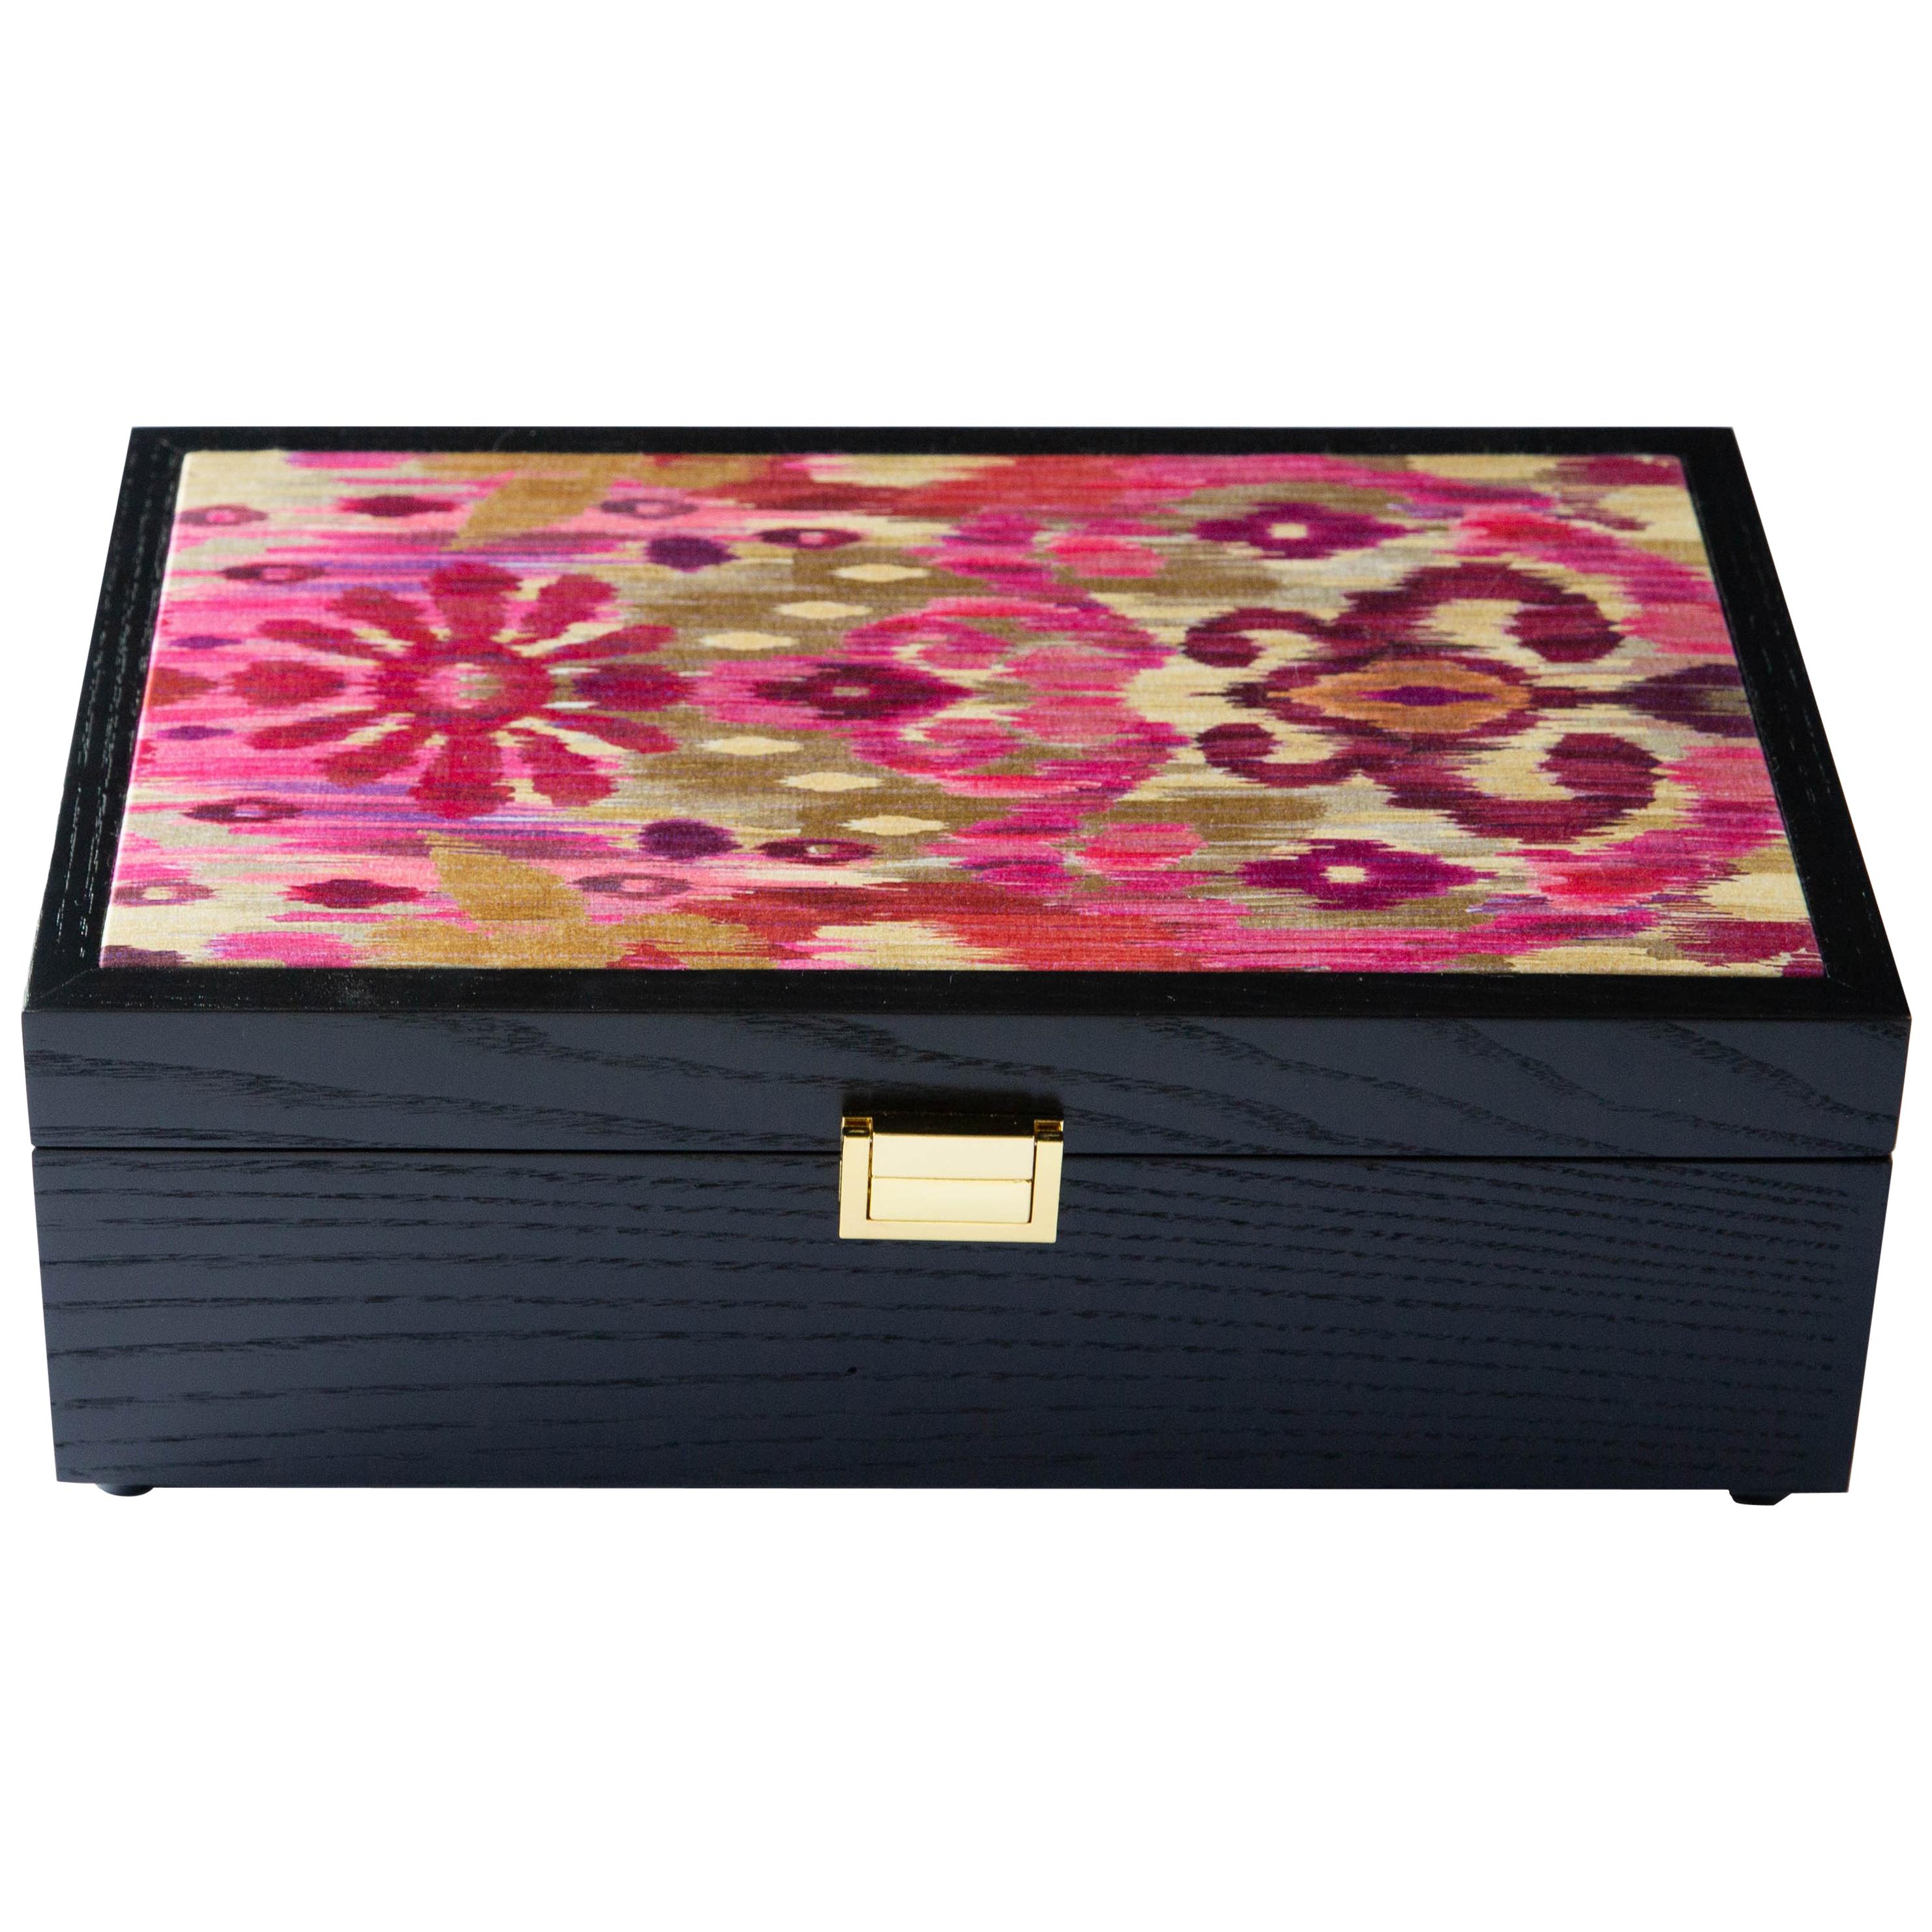 Matthew Williamson for ROOME LONDON Fine Upholstered Box Made in England